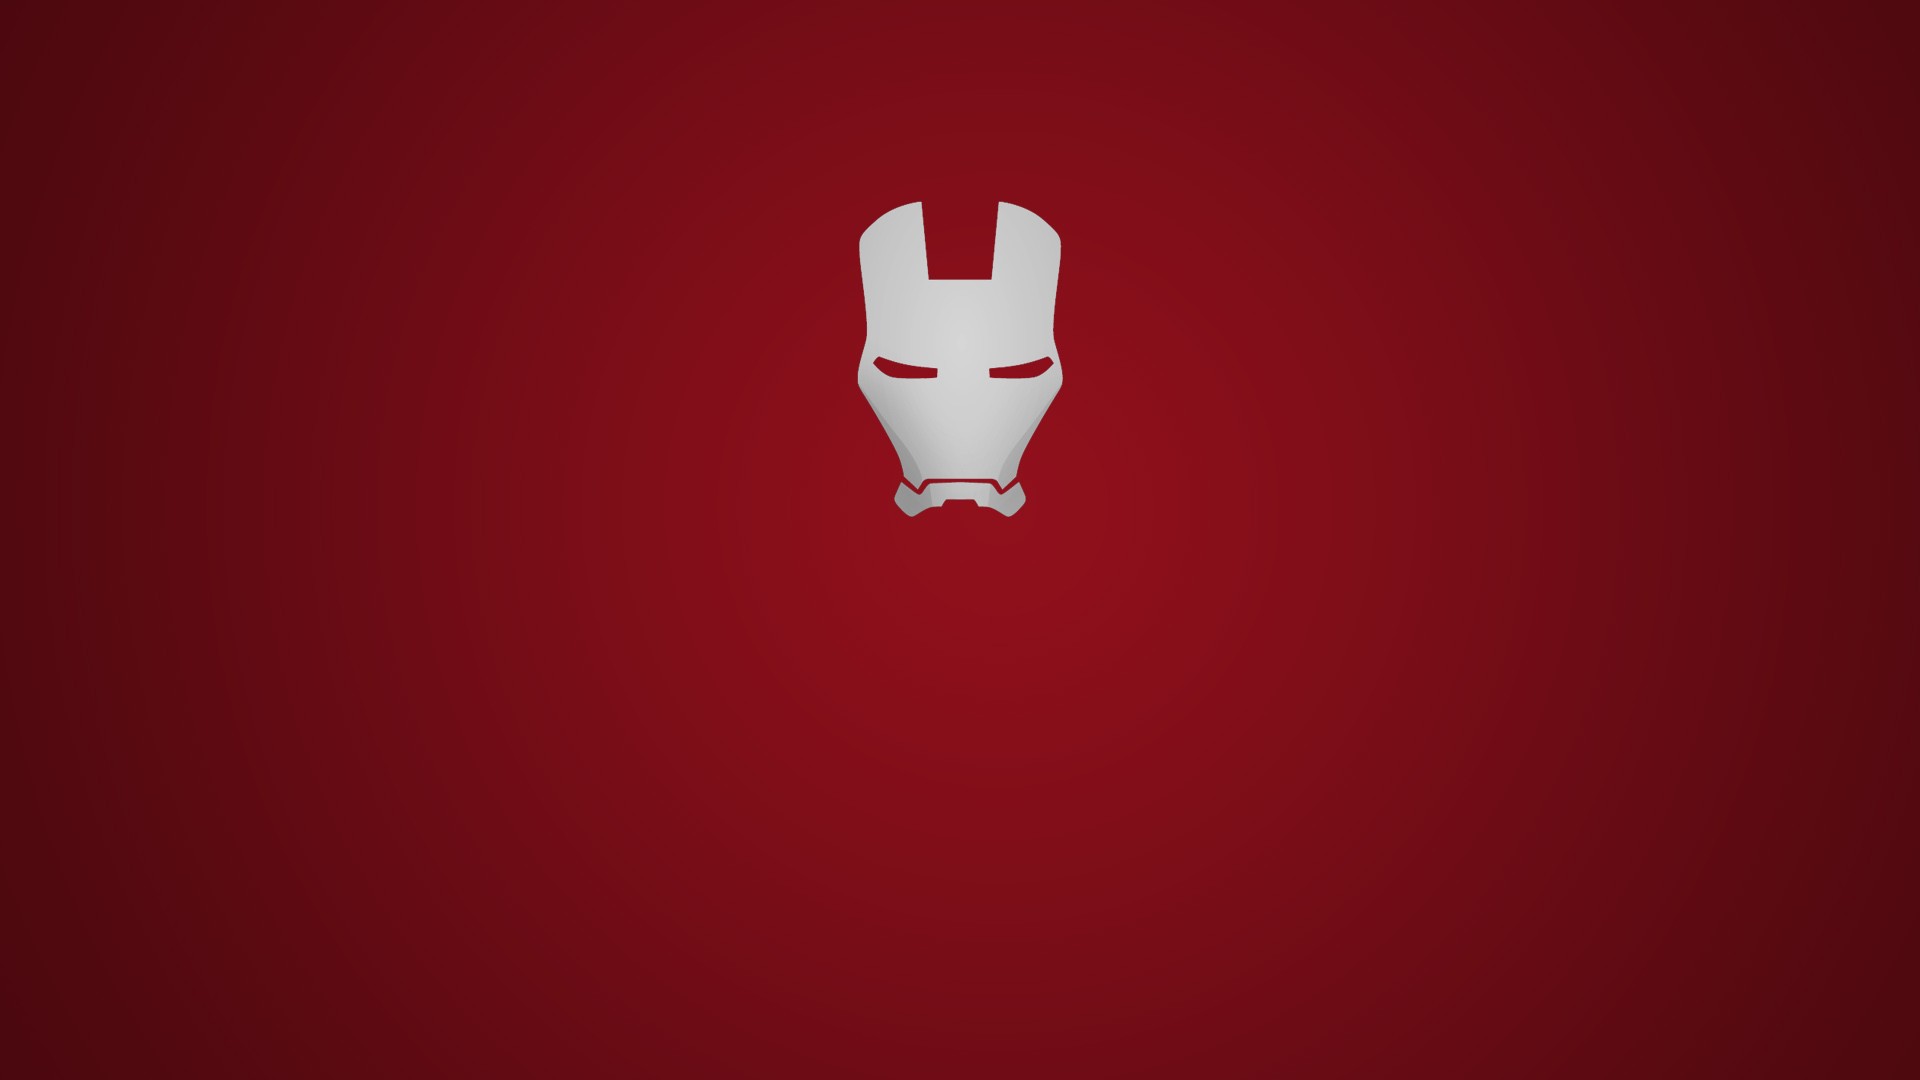 480x800 Iron Man Simple 1 Galaxy Note,HTC Desire,Nokia Lumia 520,625  Android HD 4k Wallpapers, Images, Backgrounds, Photos and Pictures